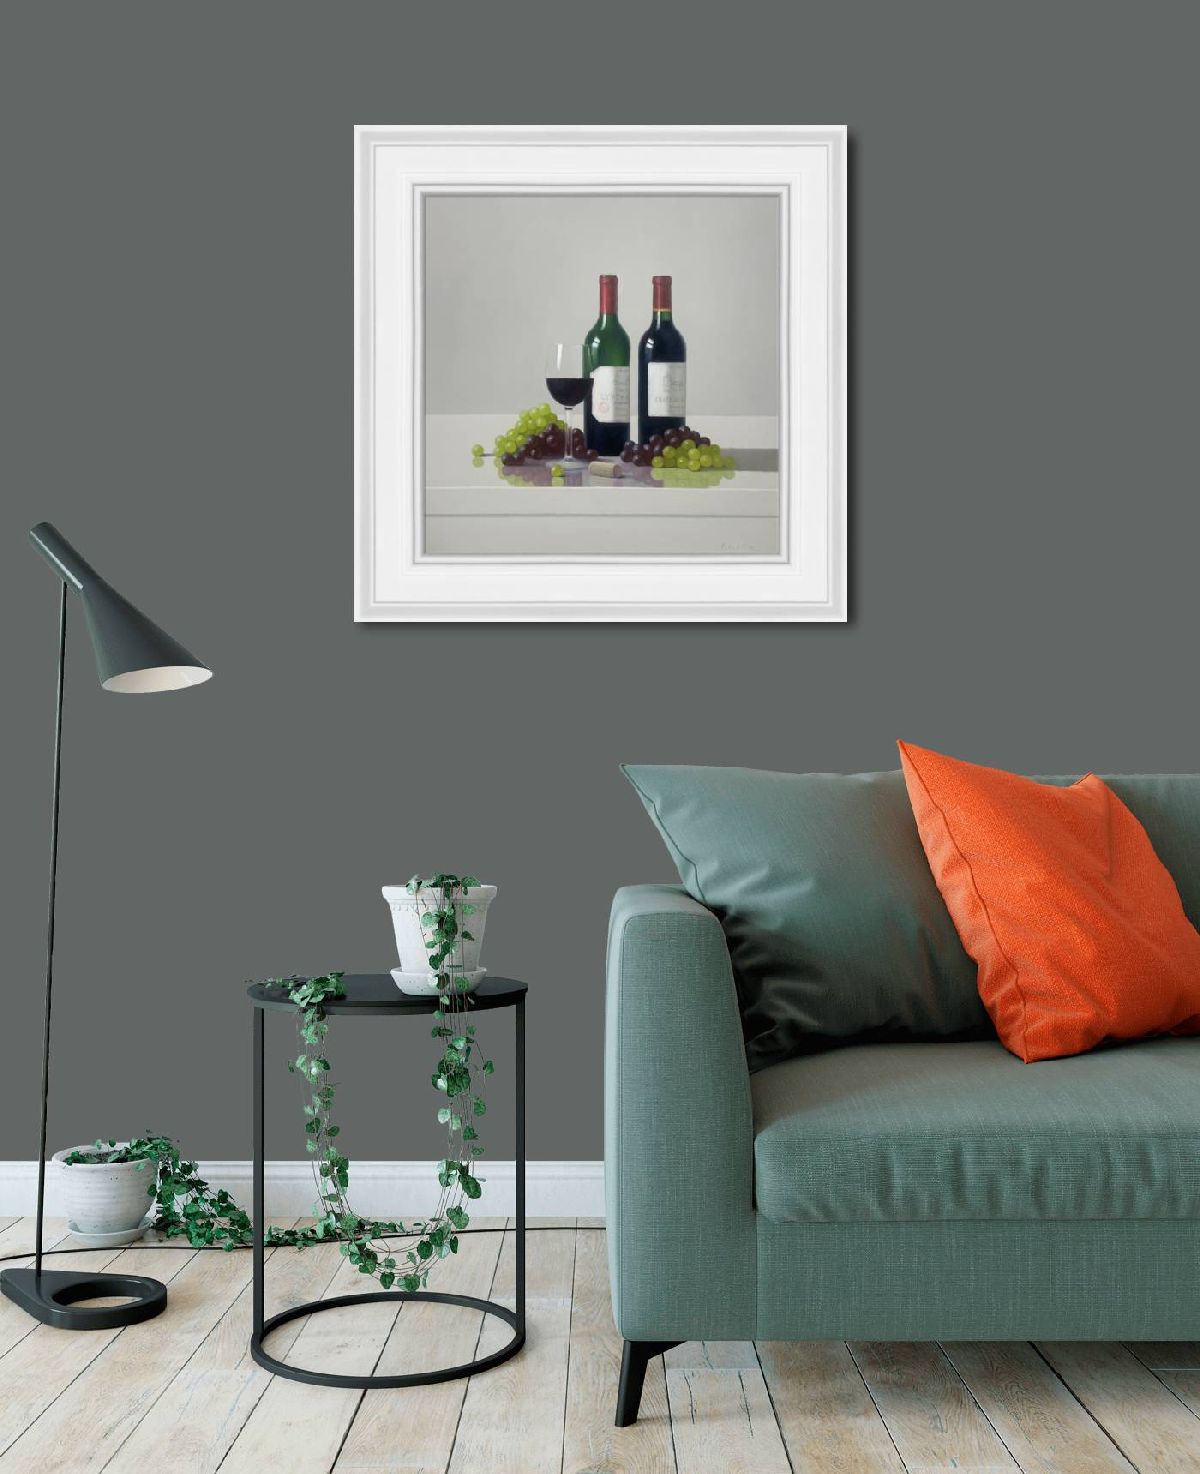 Wine and Grapes by Peter Dee